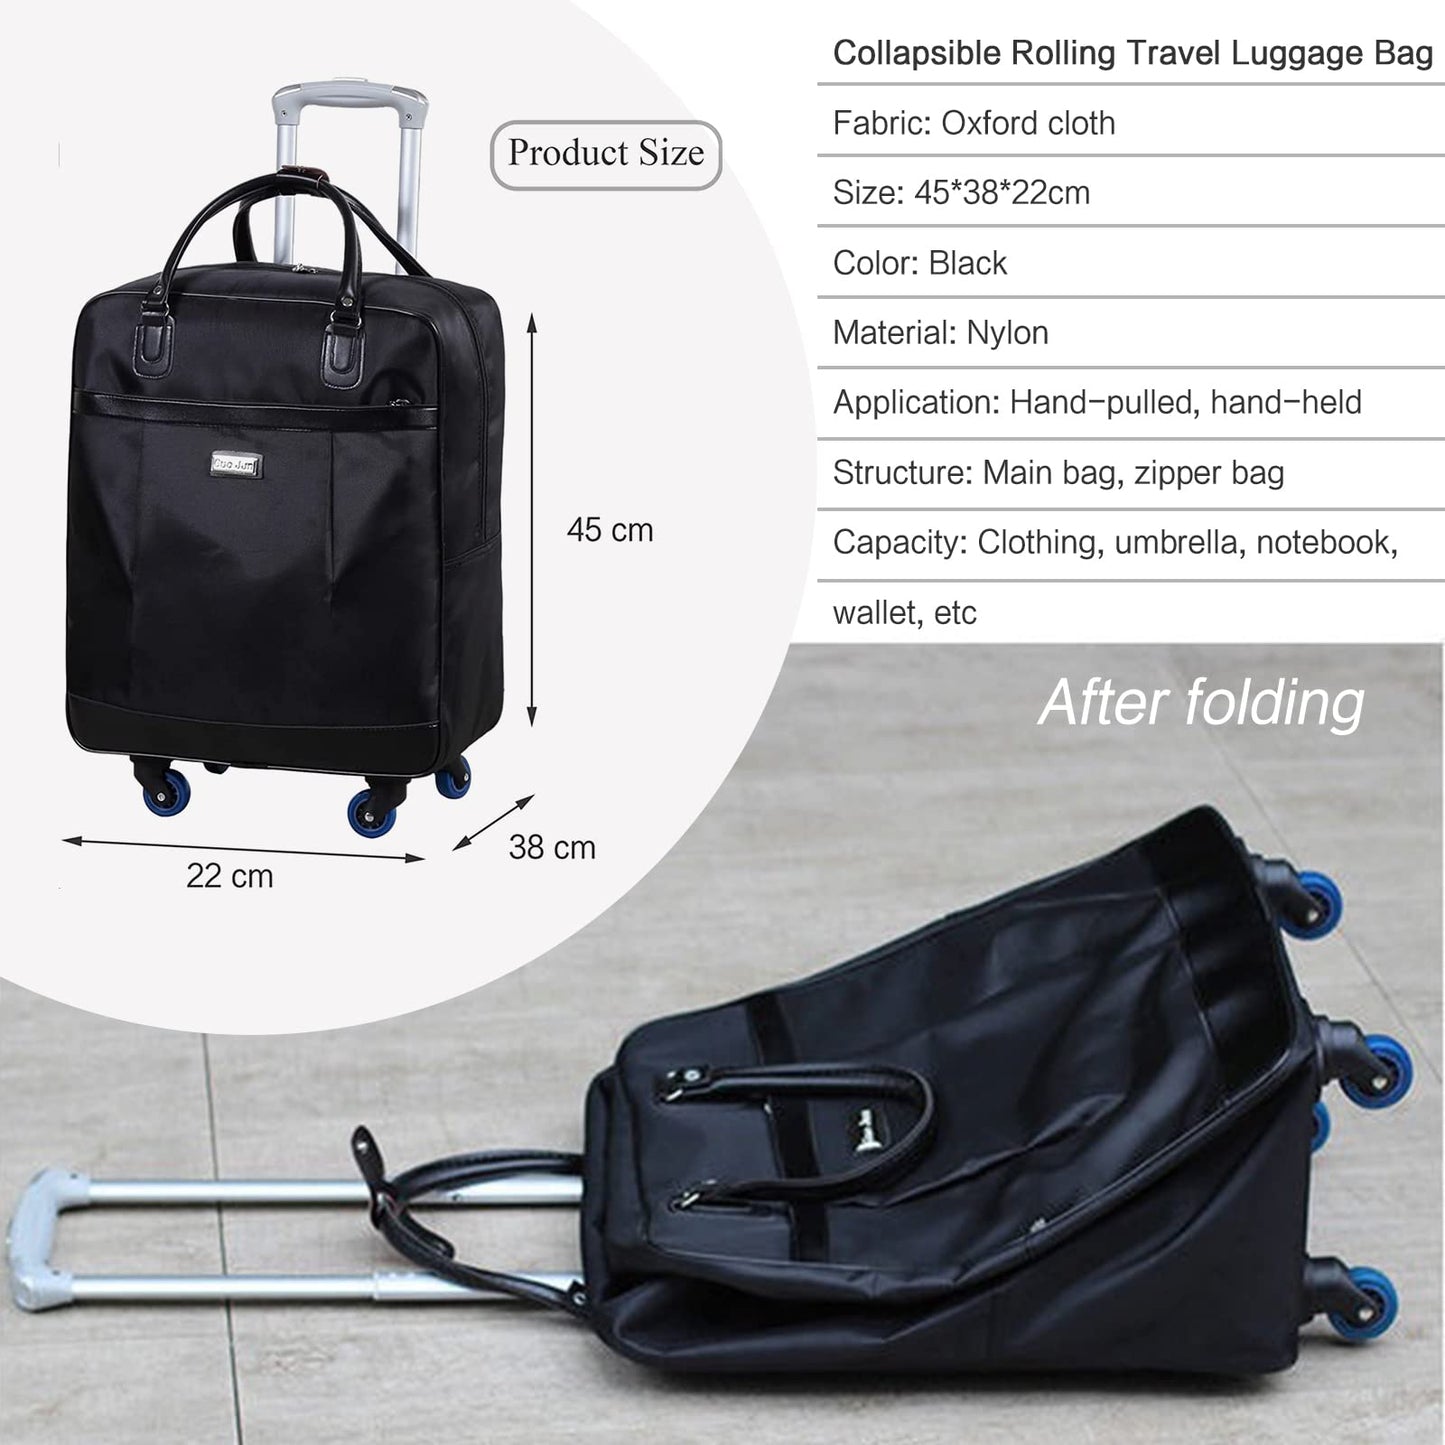 LYLYMYKHH Foldable Luggage Bag Suitcase Collapsible Rolling Travel Luggage Bag Duffel Bag with Wheels for Men Women Lightweight Luggage Suitcase for Short Trip Overnight Business Trave(Black-2)